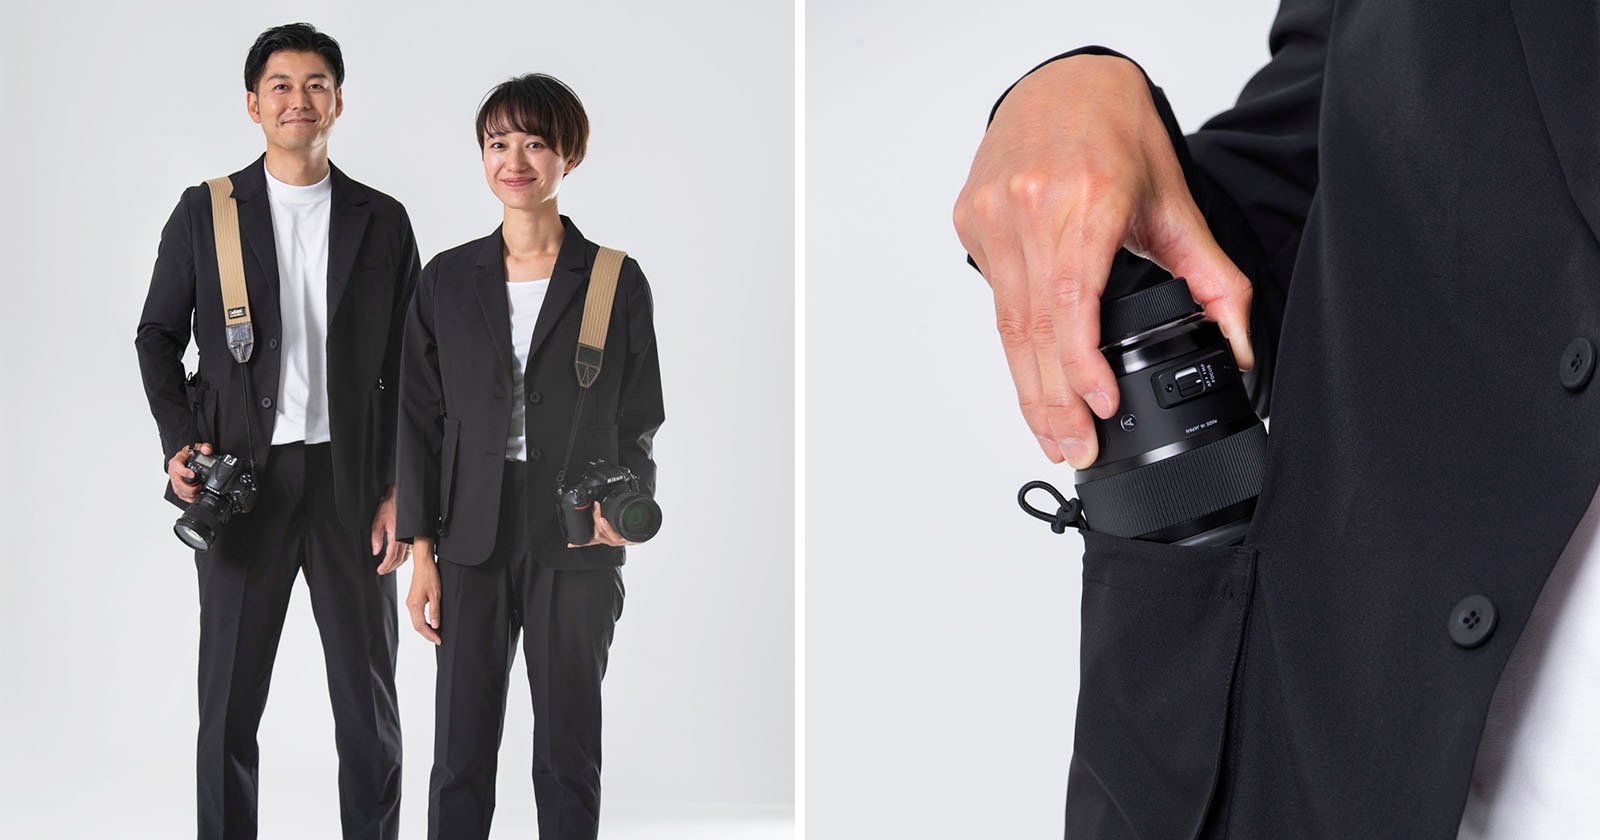 This Formal Black Suit is Designed Specifically for Photographers